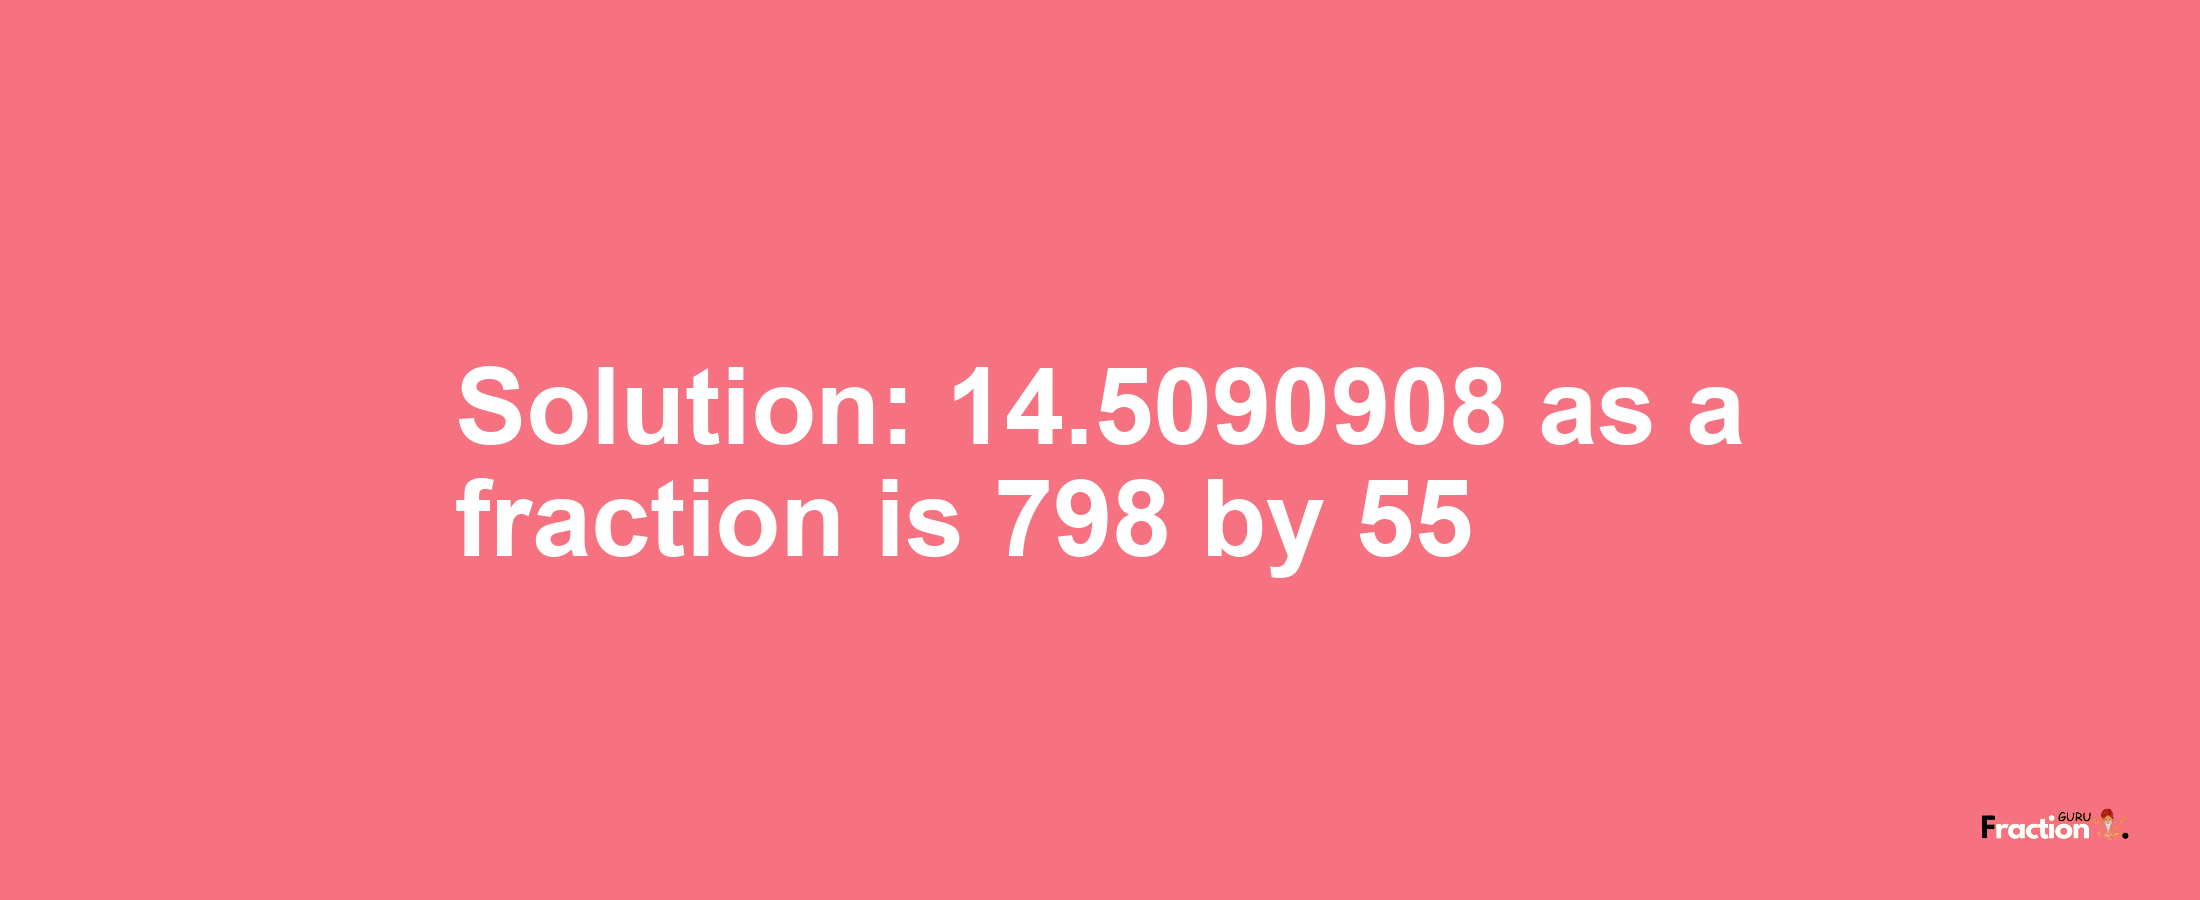 Solution:14.5090908 as a fraction is 798/55